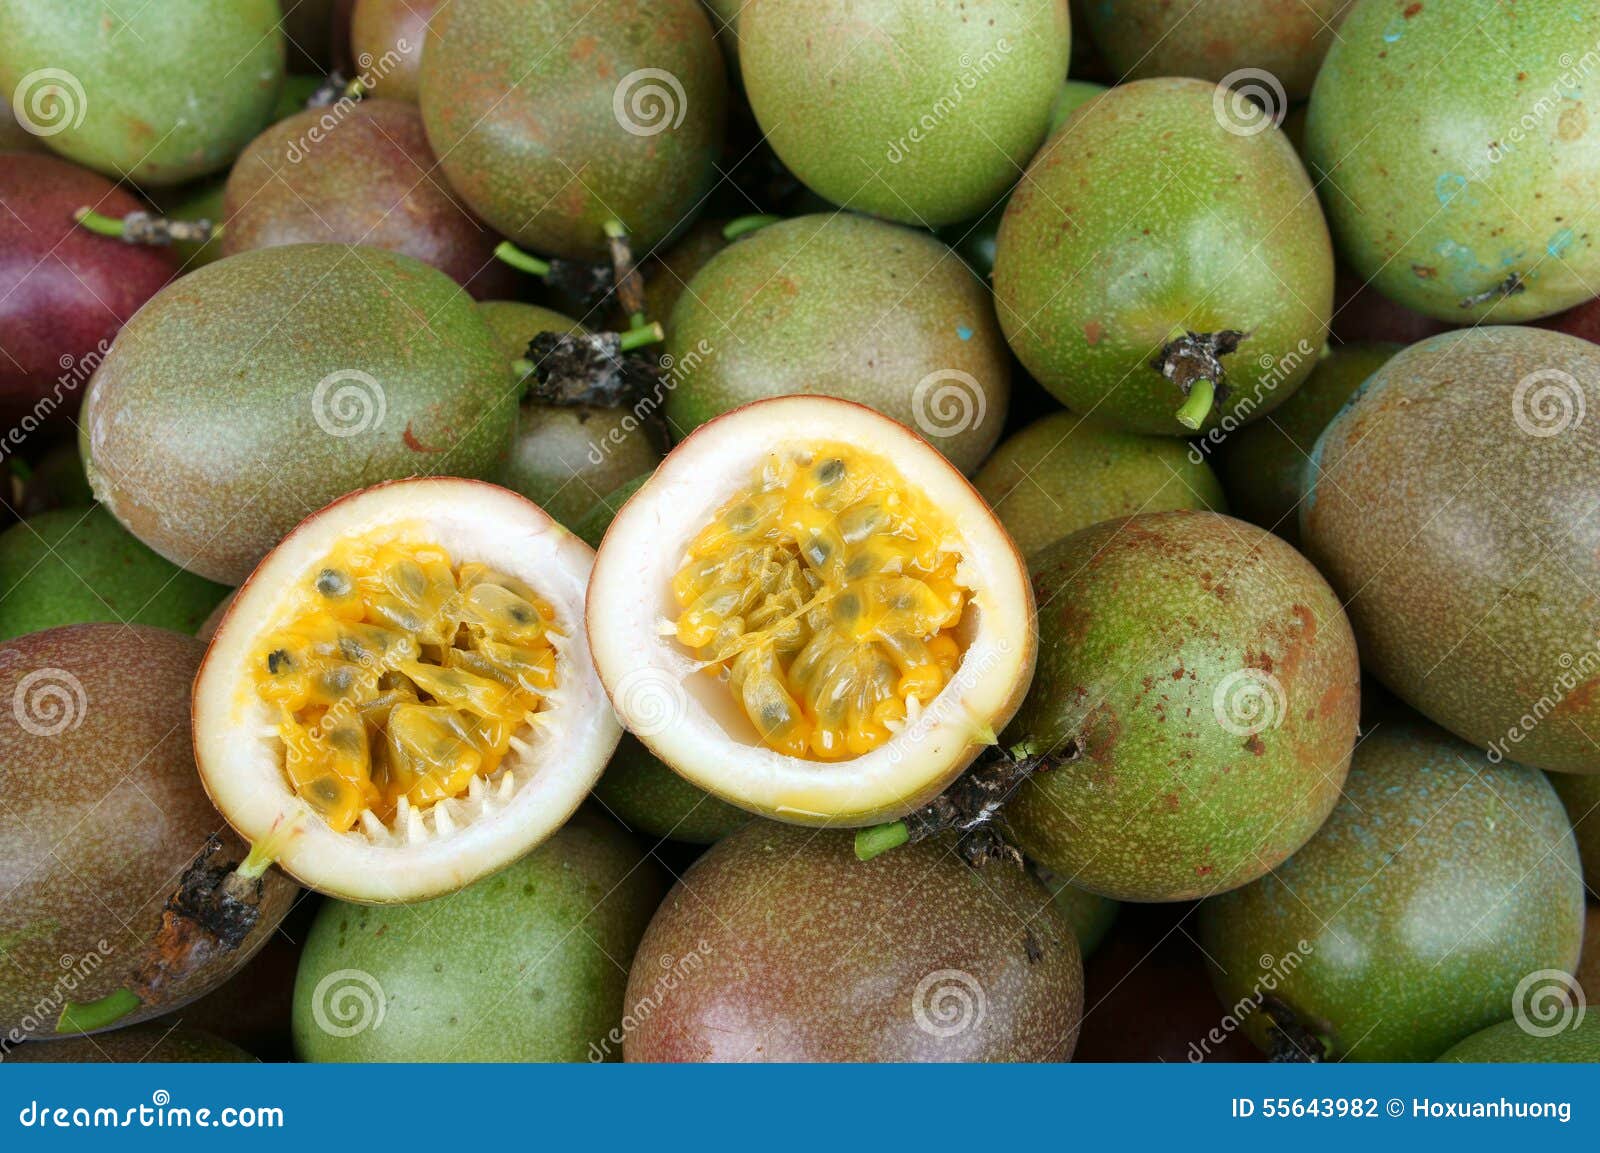 passion fruit, vitamin c, healthy food, passionfruit